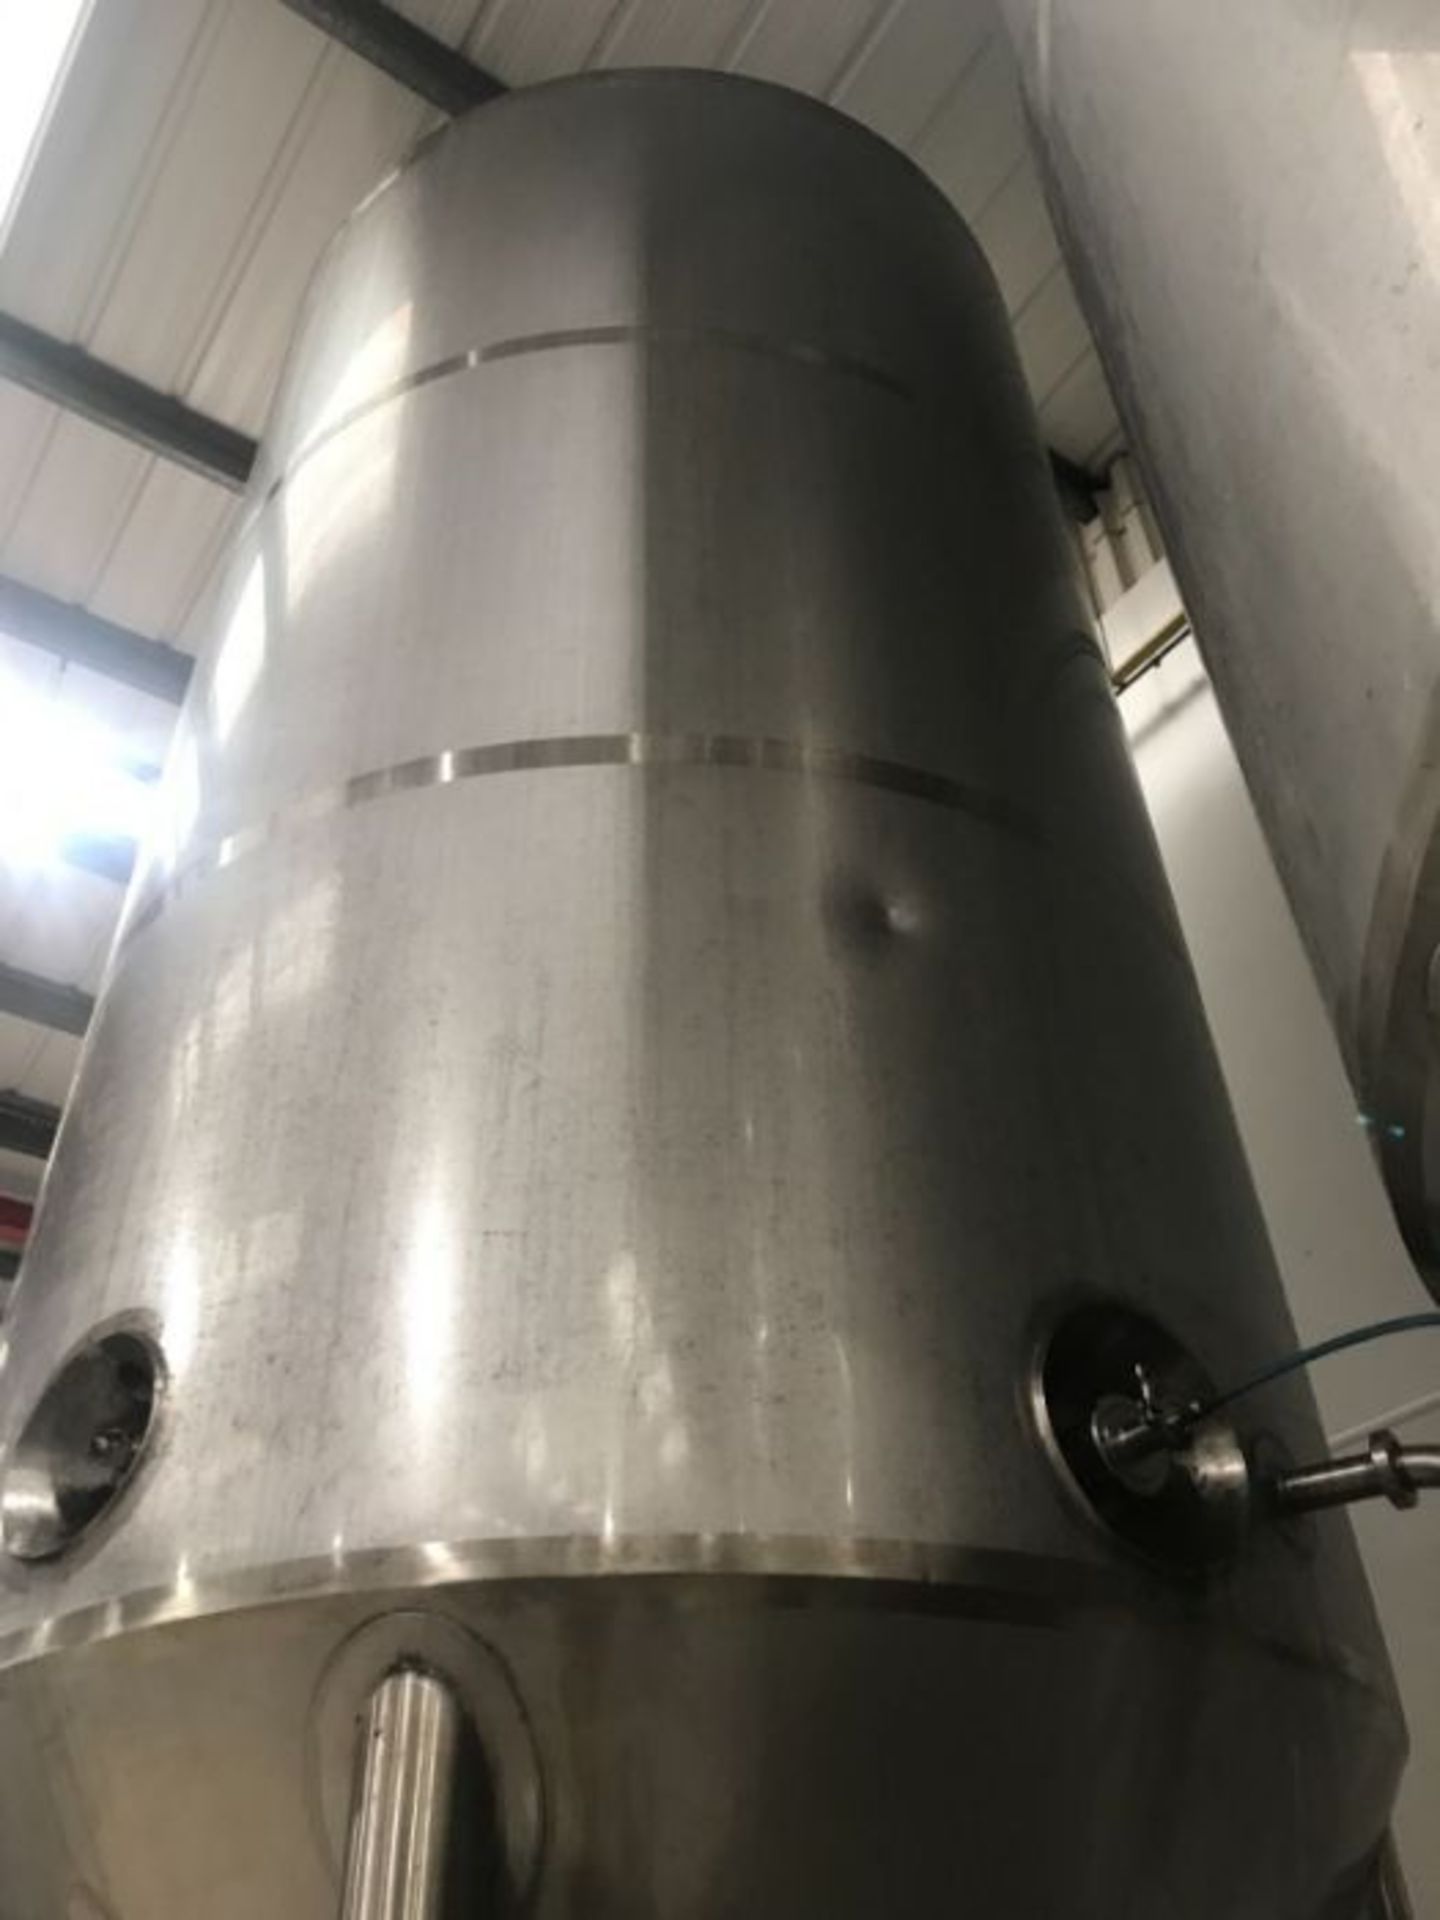 Ningbo Lehui Food Machinery Co Ltd 10,000 litre stainless steel jacketed tank (2014) - Image 5 of 5